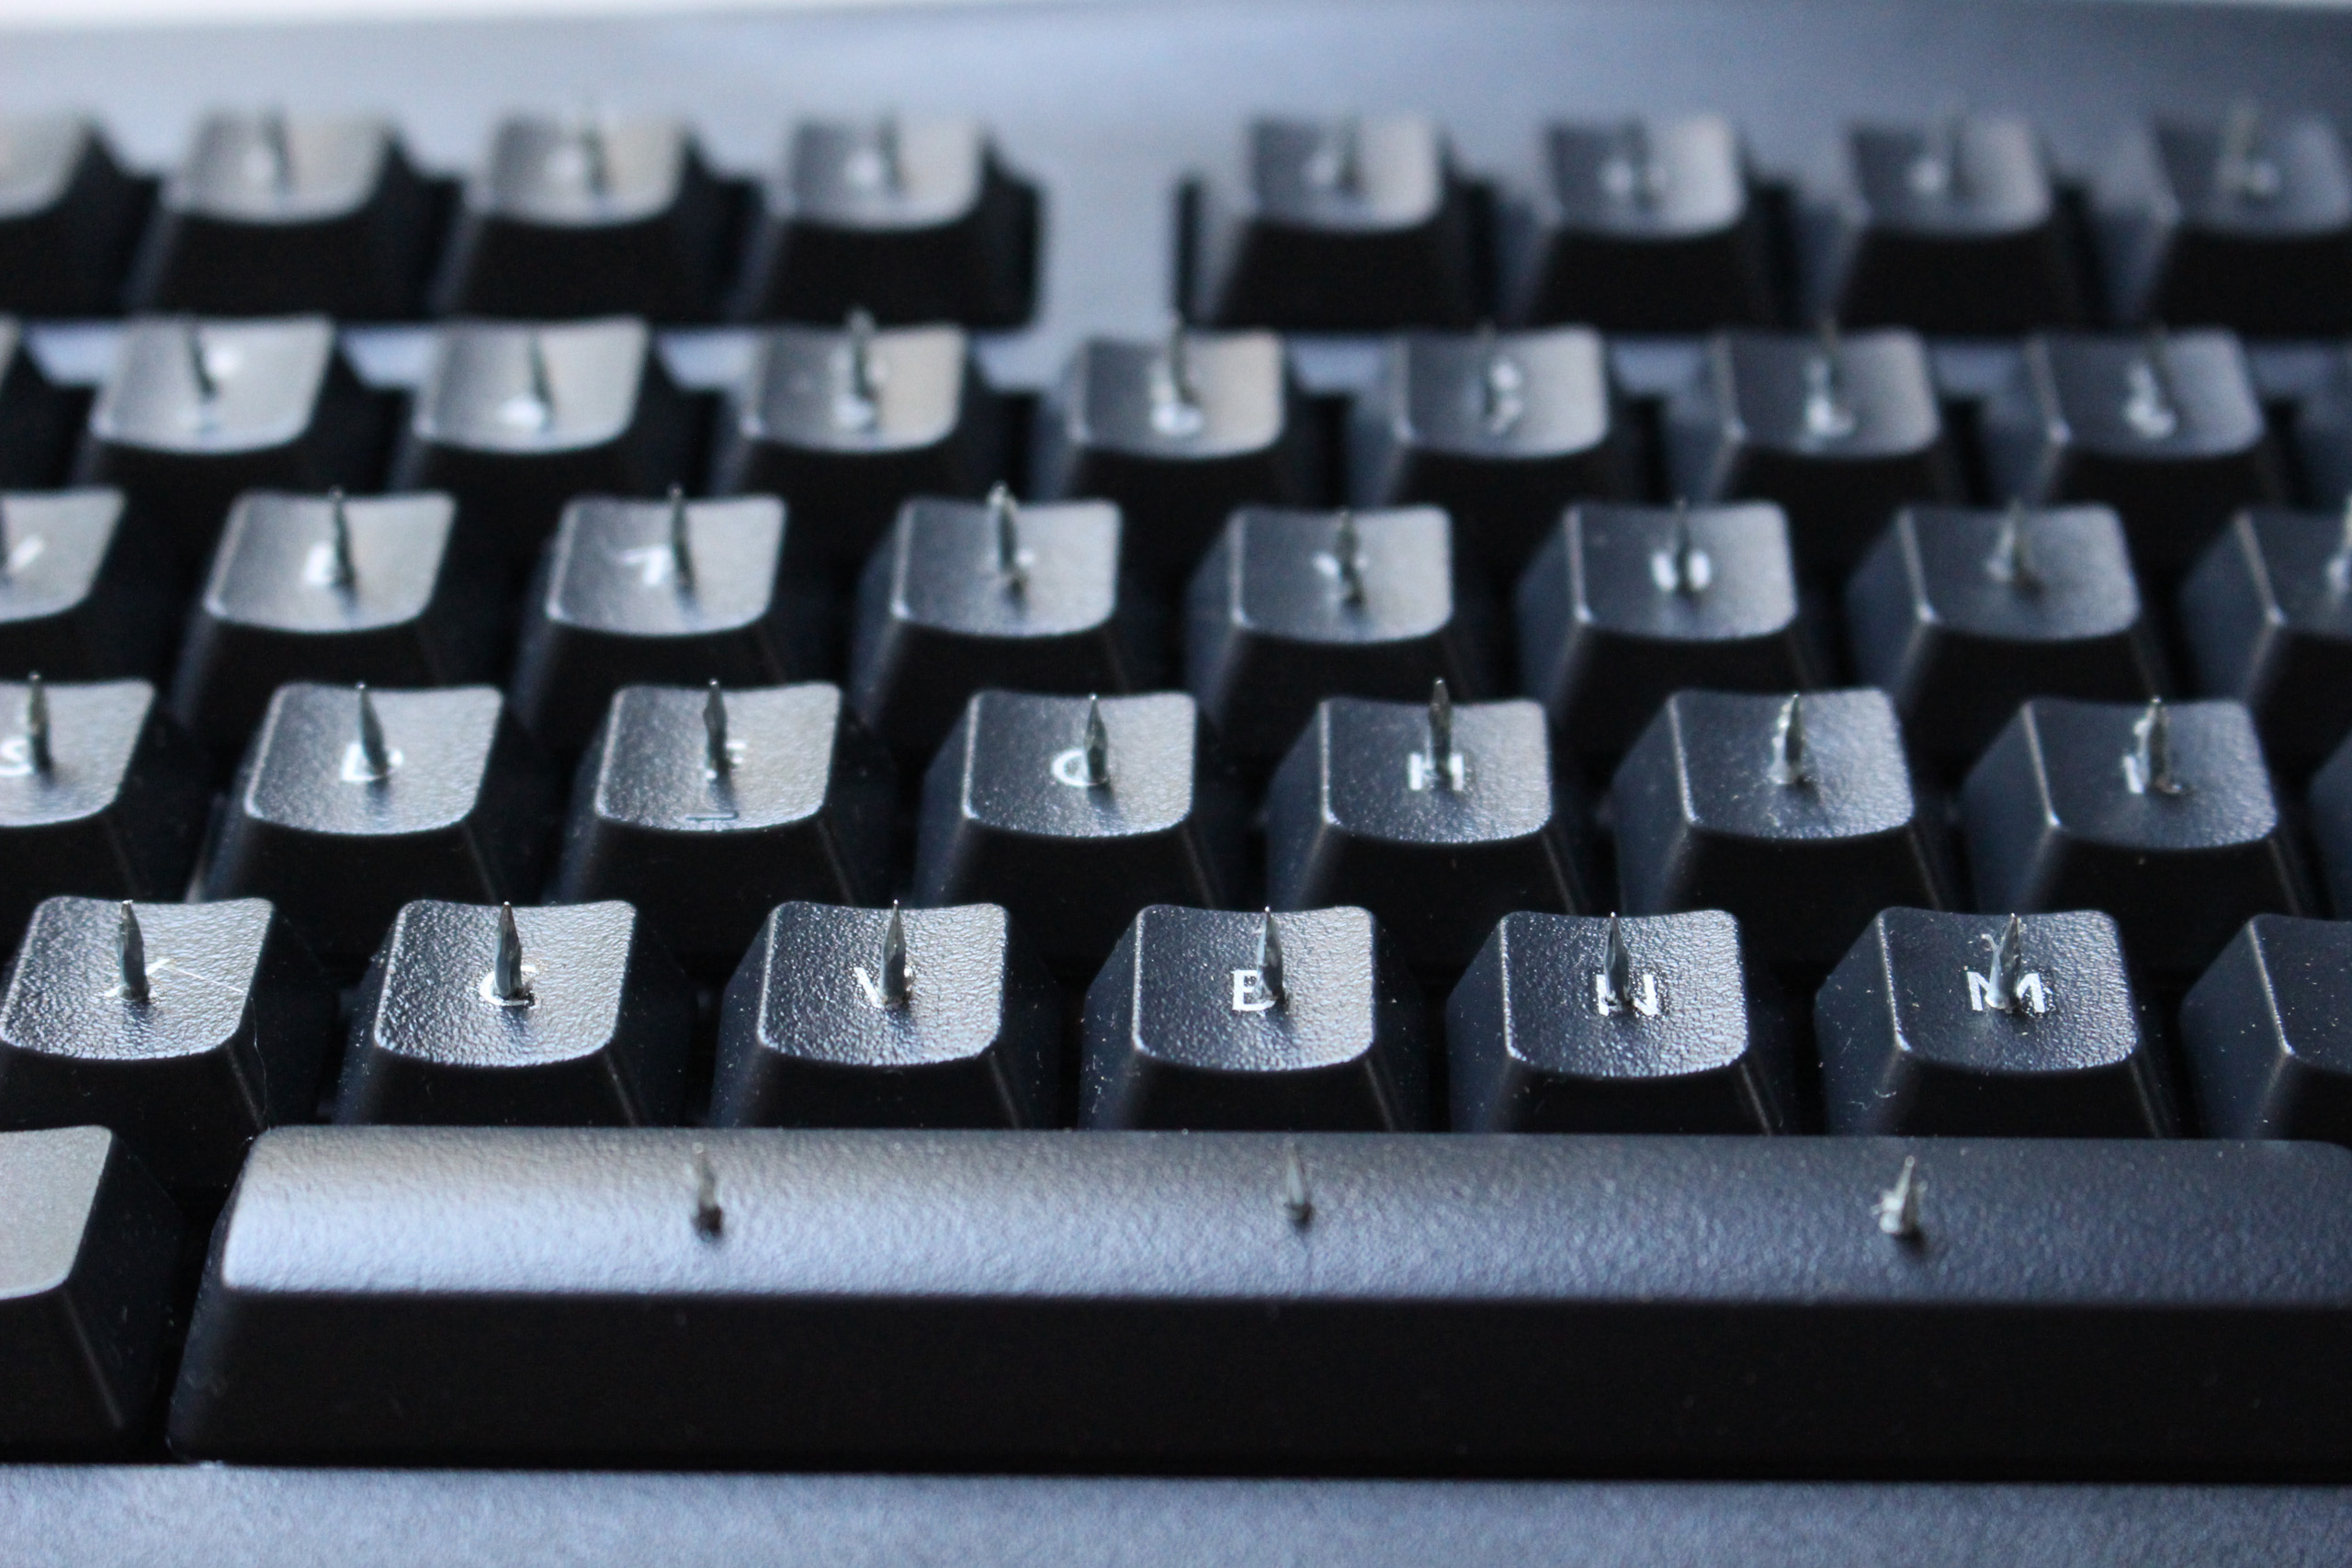 Close up of Reticence, version two. A keyboard with thin nails driven through each key. The sharp end emerges through the letter on each key. Picture taken by Steven LeMieux